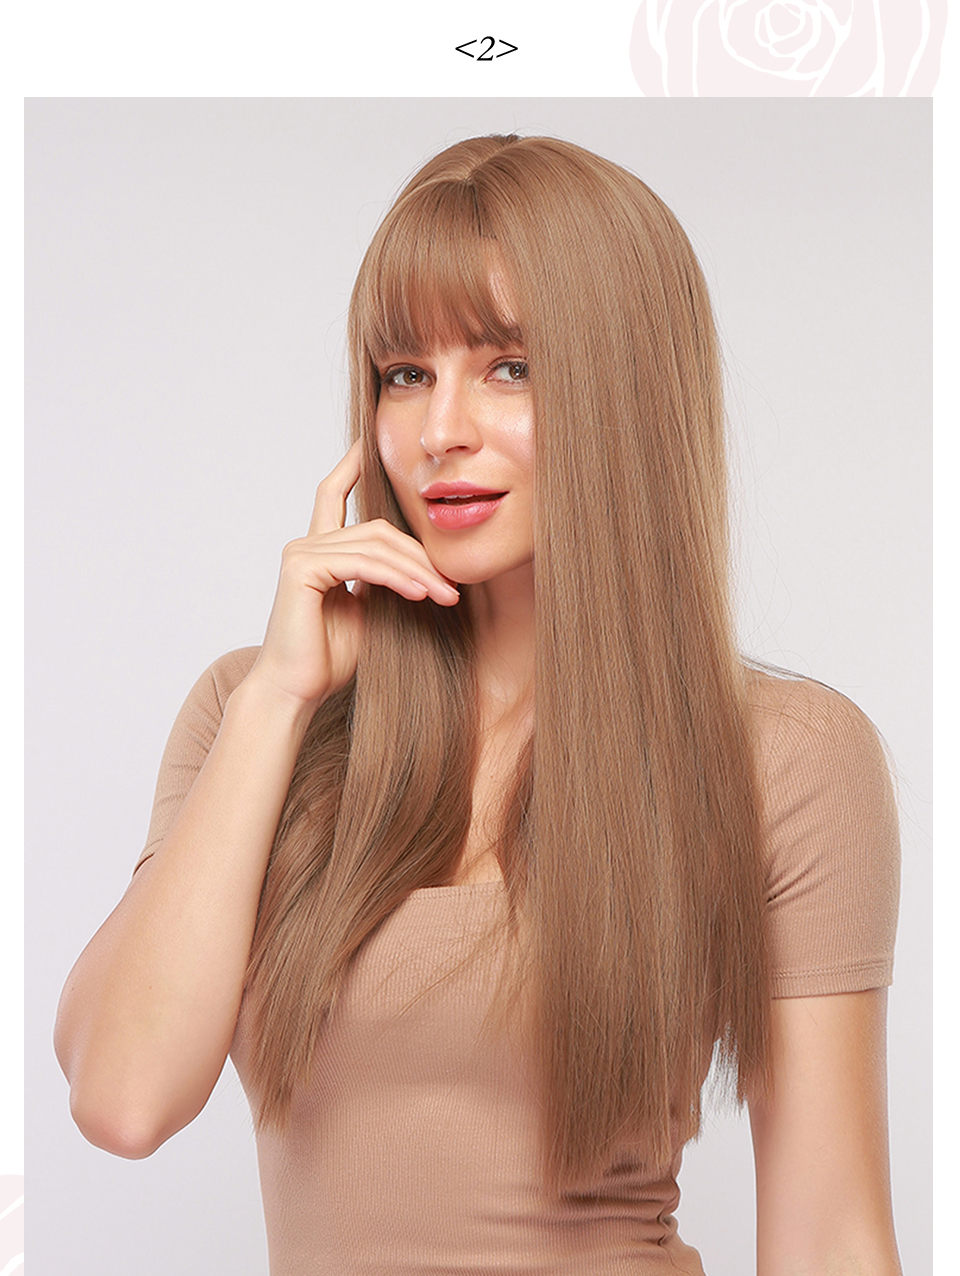 Women's Long Natural Straigt Synthetic Hair With Bangs Capless Wig 26 Inches